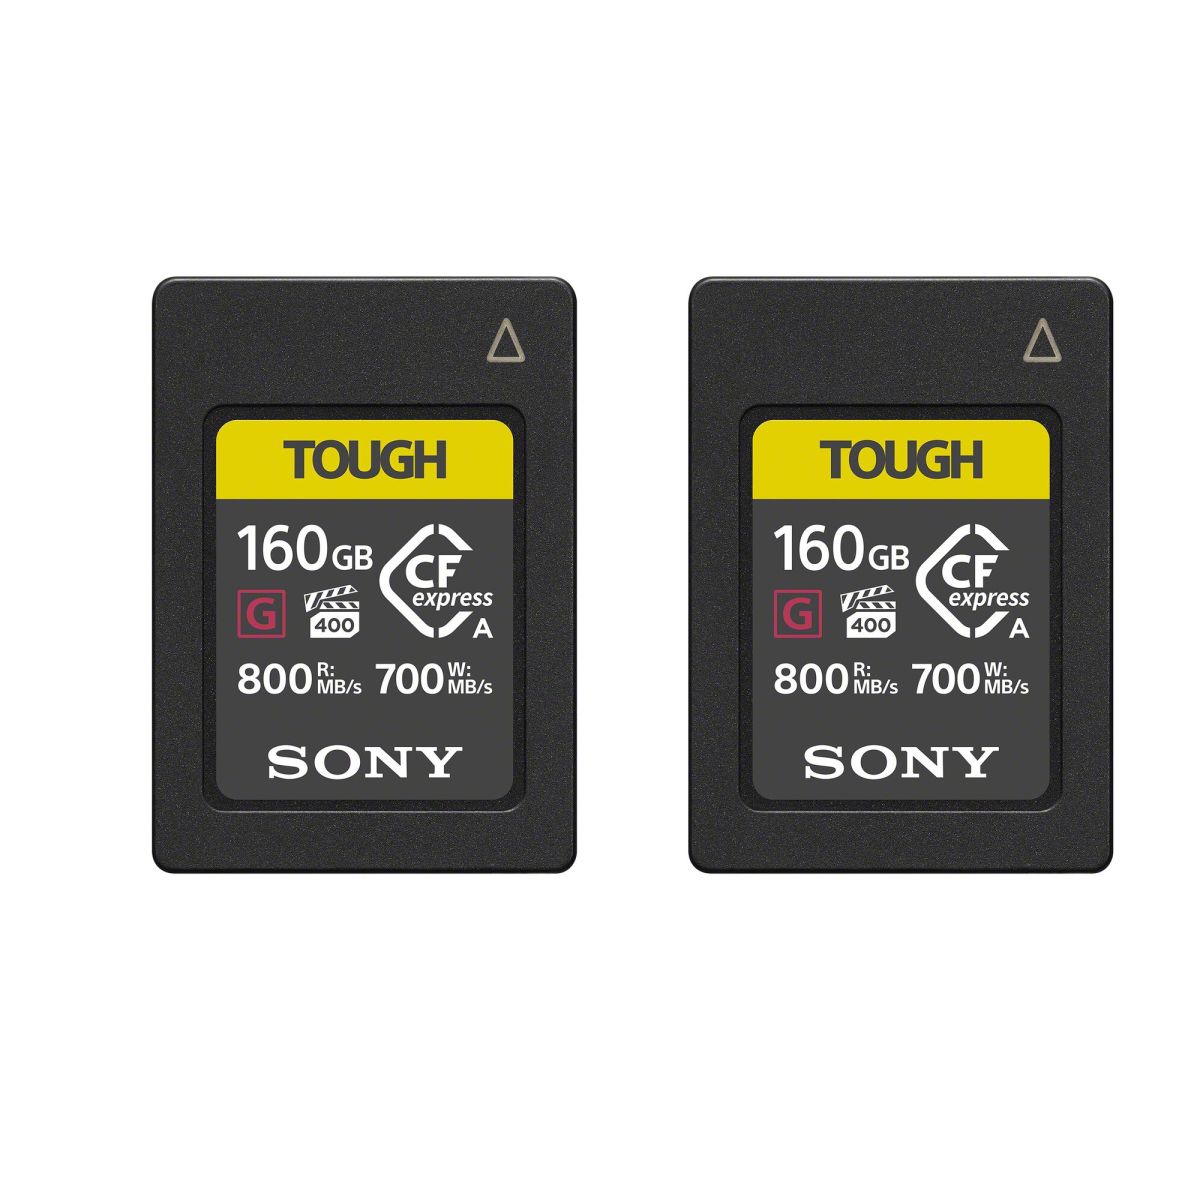 Sony TWO 160GB CFexpress Type A TOUGH Memory Cards